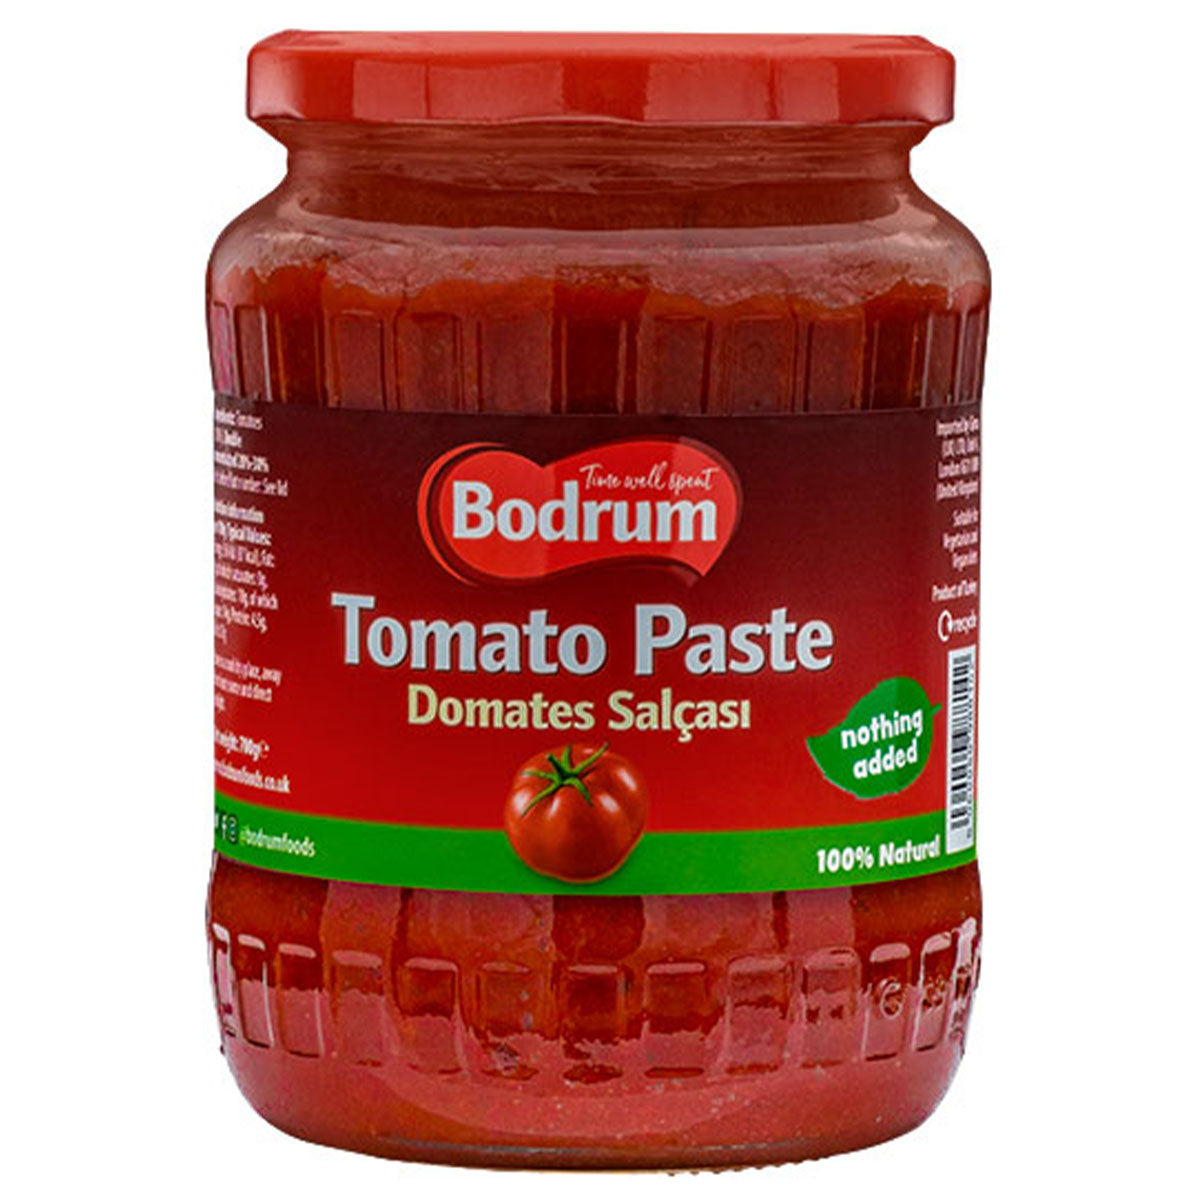 Bodrum - Tomato Paste - 700g - Continental Food Store